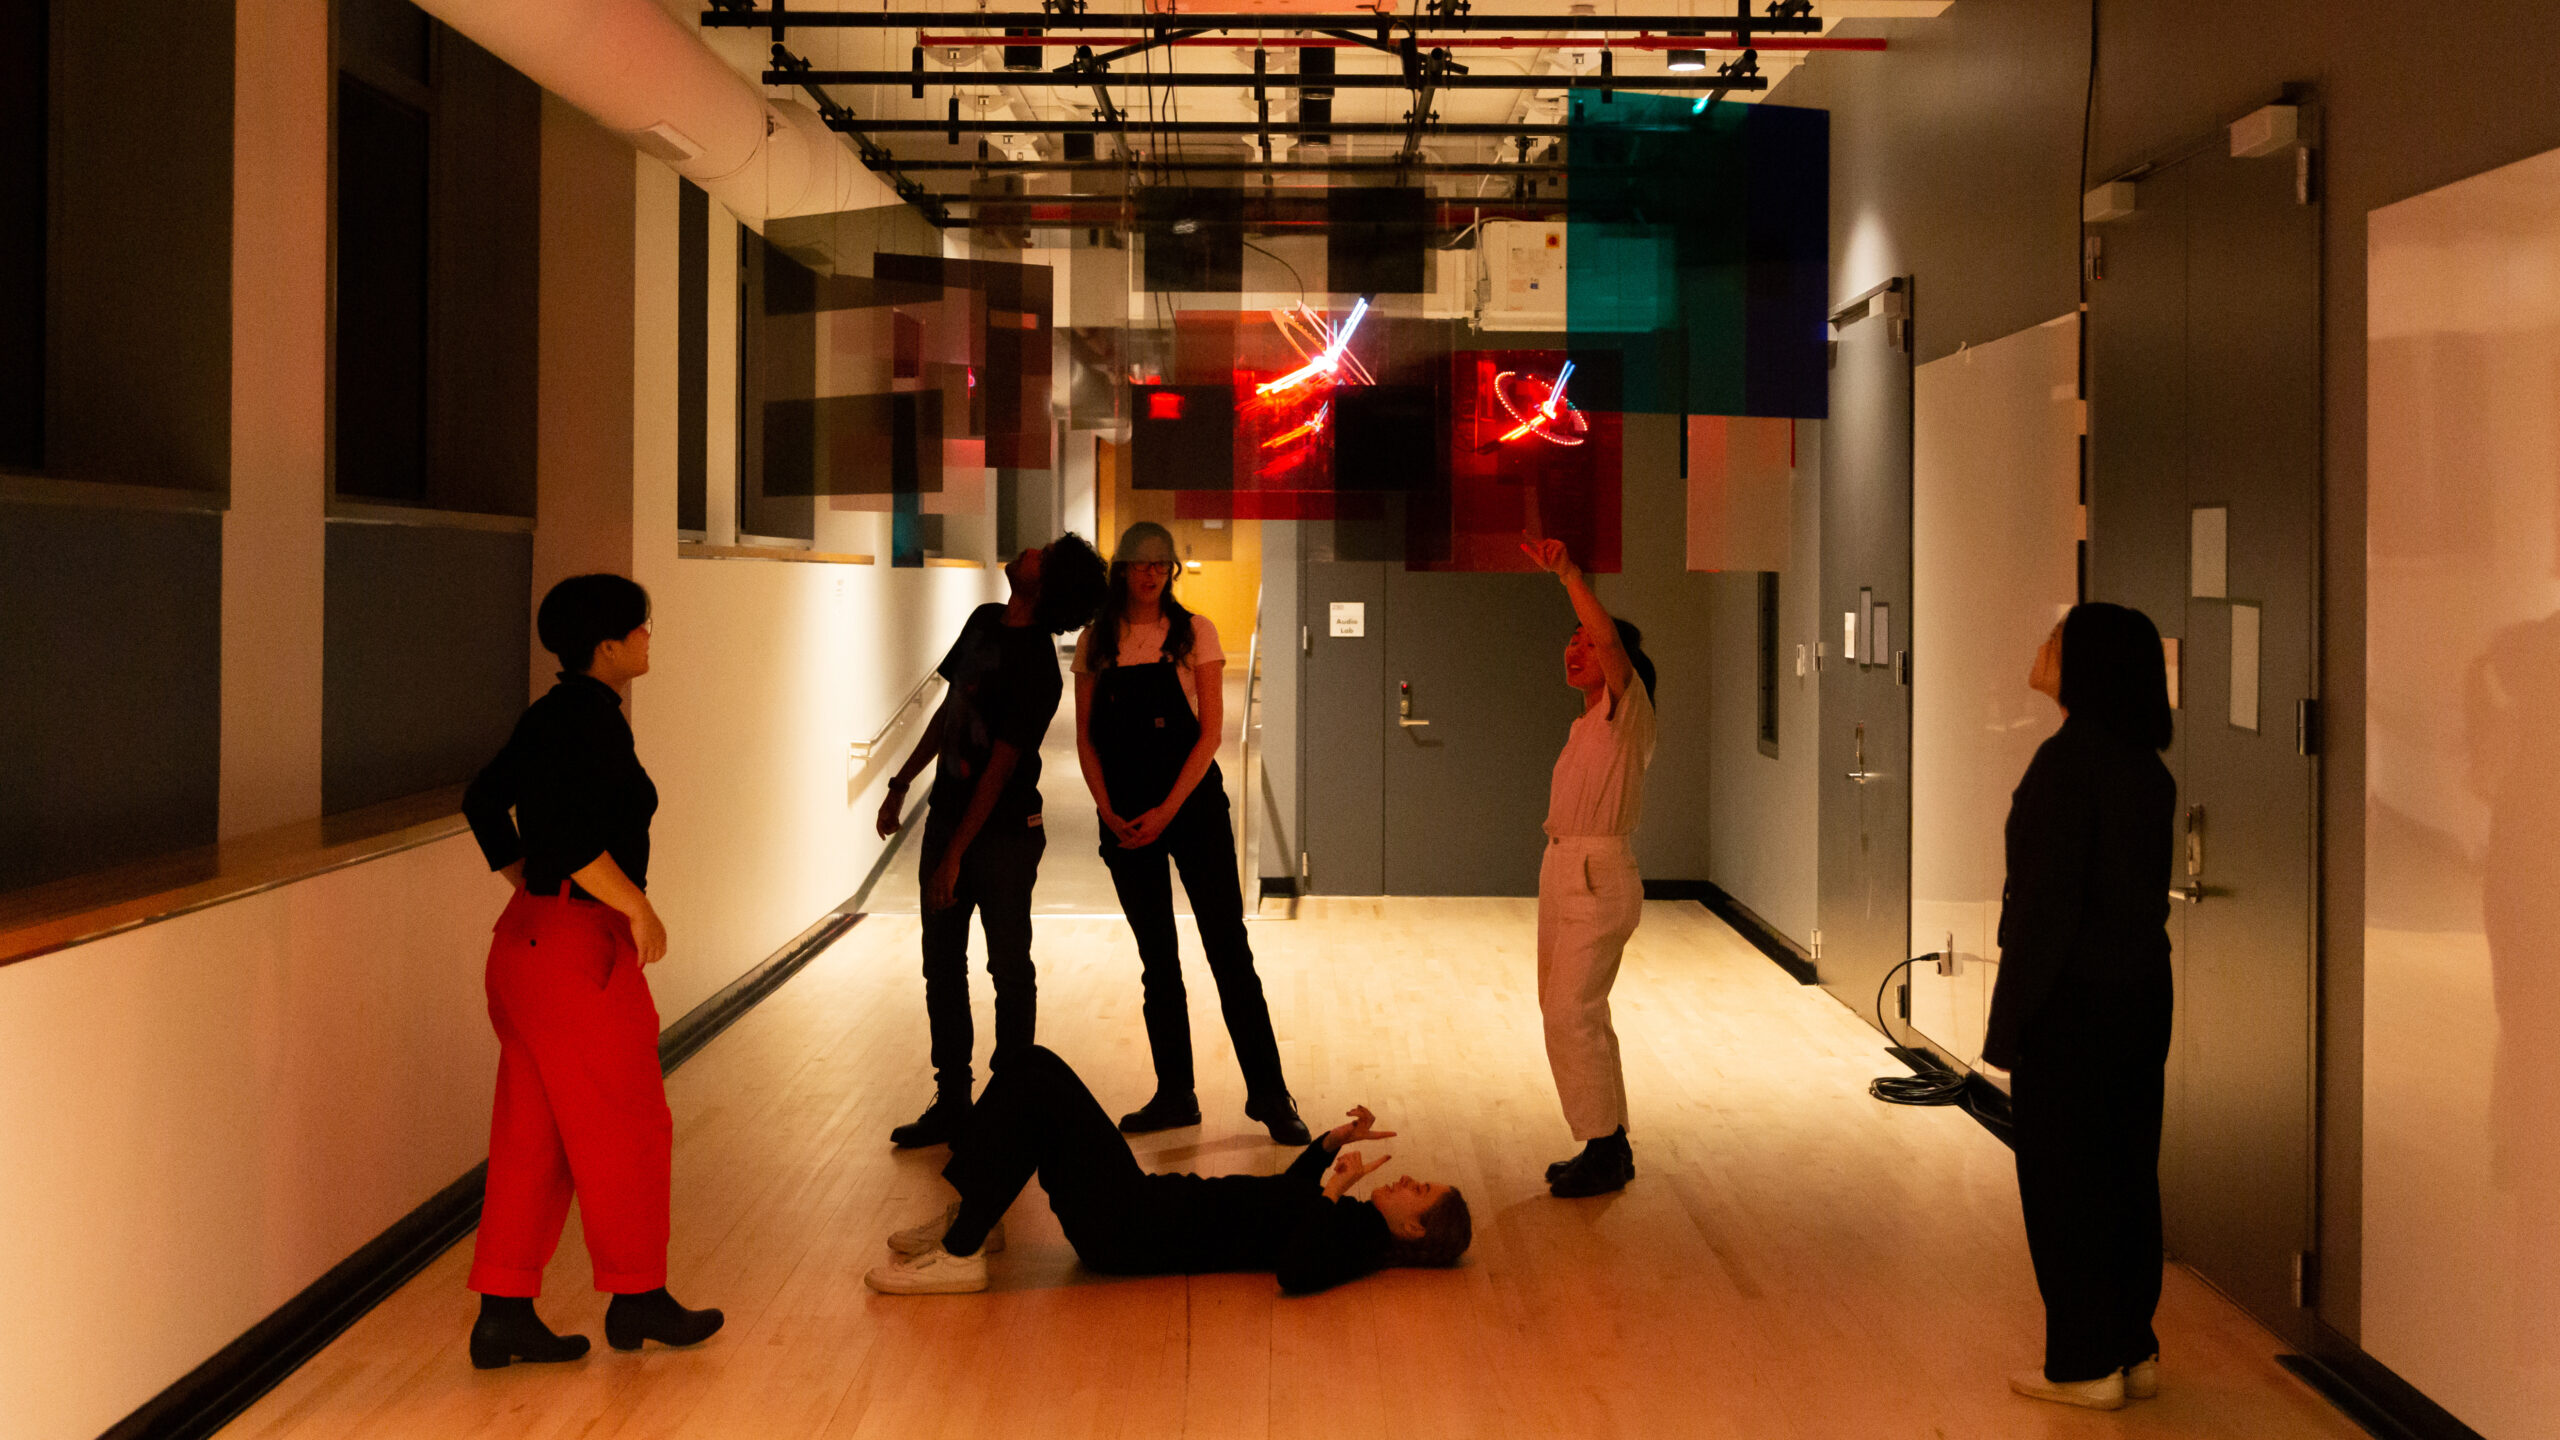 Six of my friends are interacting with the installation. From left to right: Leia is standing outside the perimeter of the acrylic panels, gazing at the light sculpture; Suraj is underneath the mirror panel in the back and turning his head to look at the reflection; Zoe is leaning towards Suraj while looking at Martha, who is lying on the floor, looking up at the light sculpture while gesturing a camera frame; Julia is pointing at a panel and seems to be conversing with Martha, Zoe, and Leia; I-Jon is standing outside the perimeter to the right, gazing at the light sculpture.